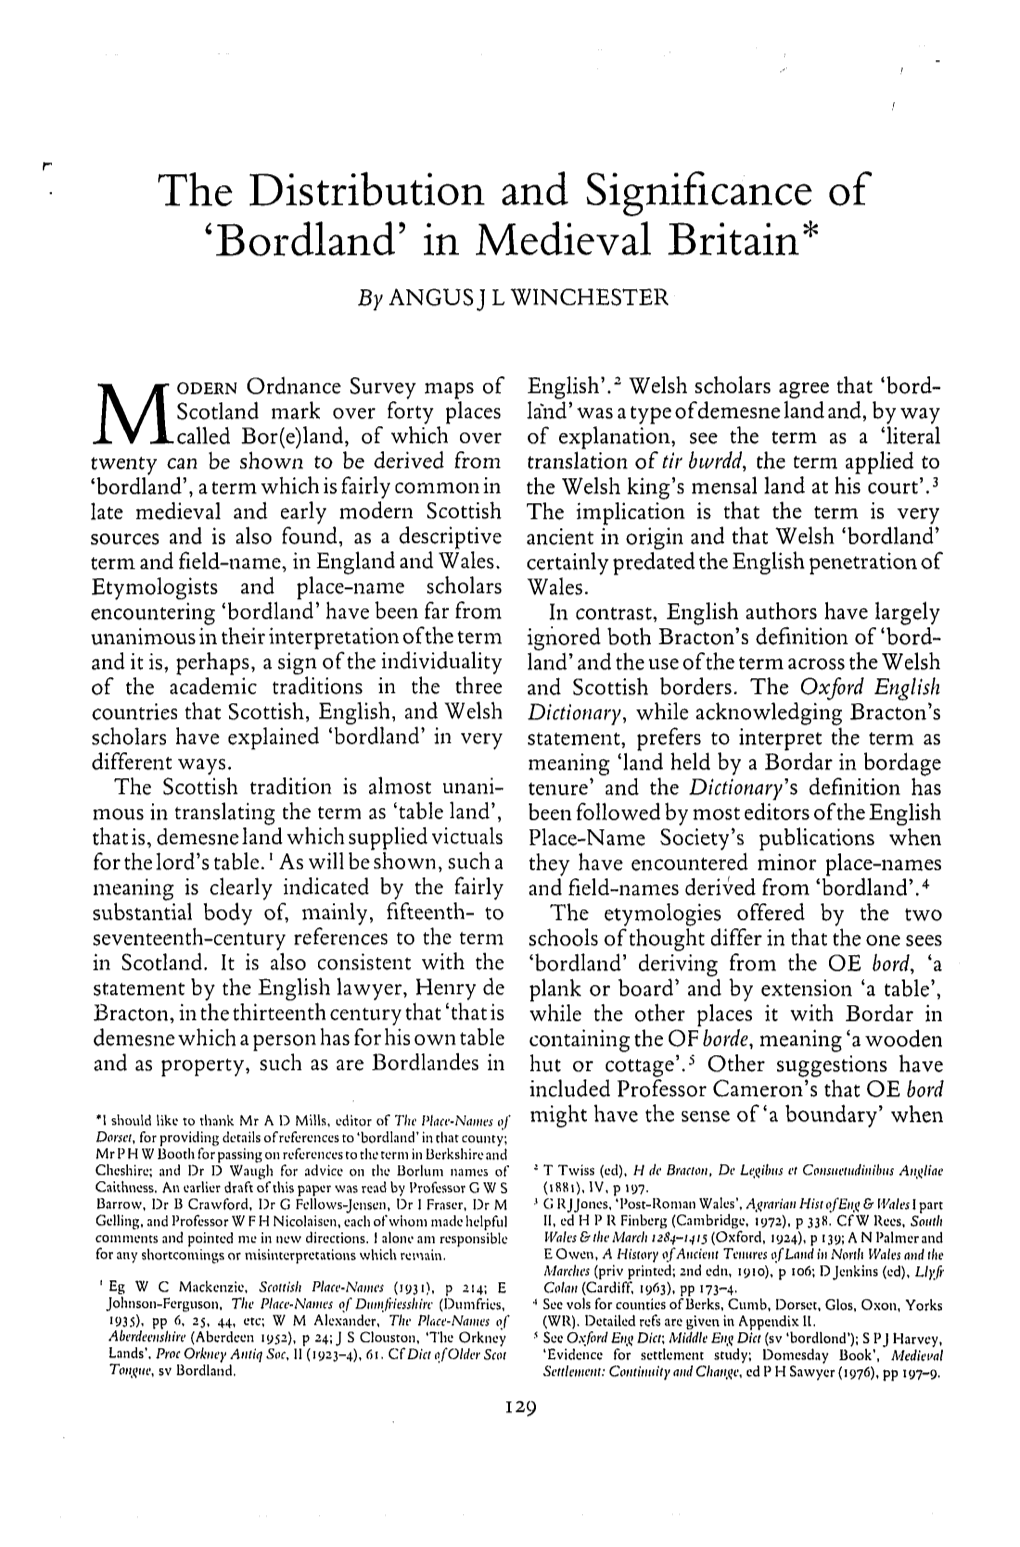 In Medieval Britain* by ANGUSJ L WINCHESTER